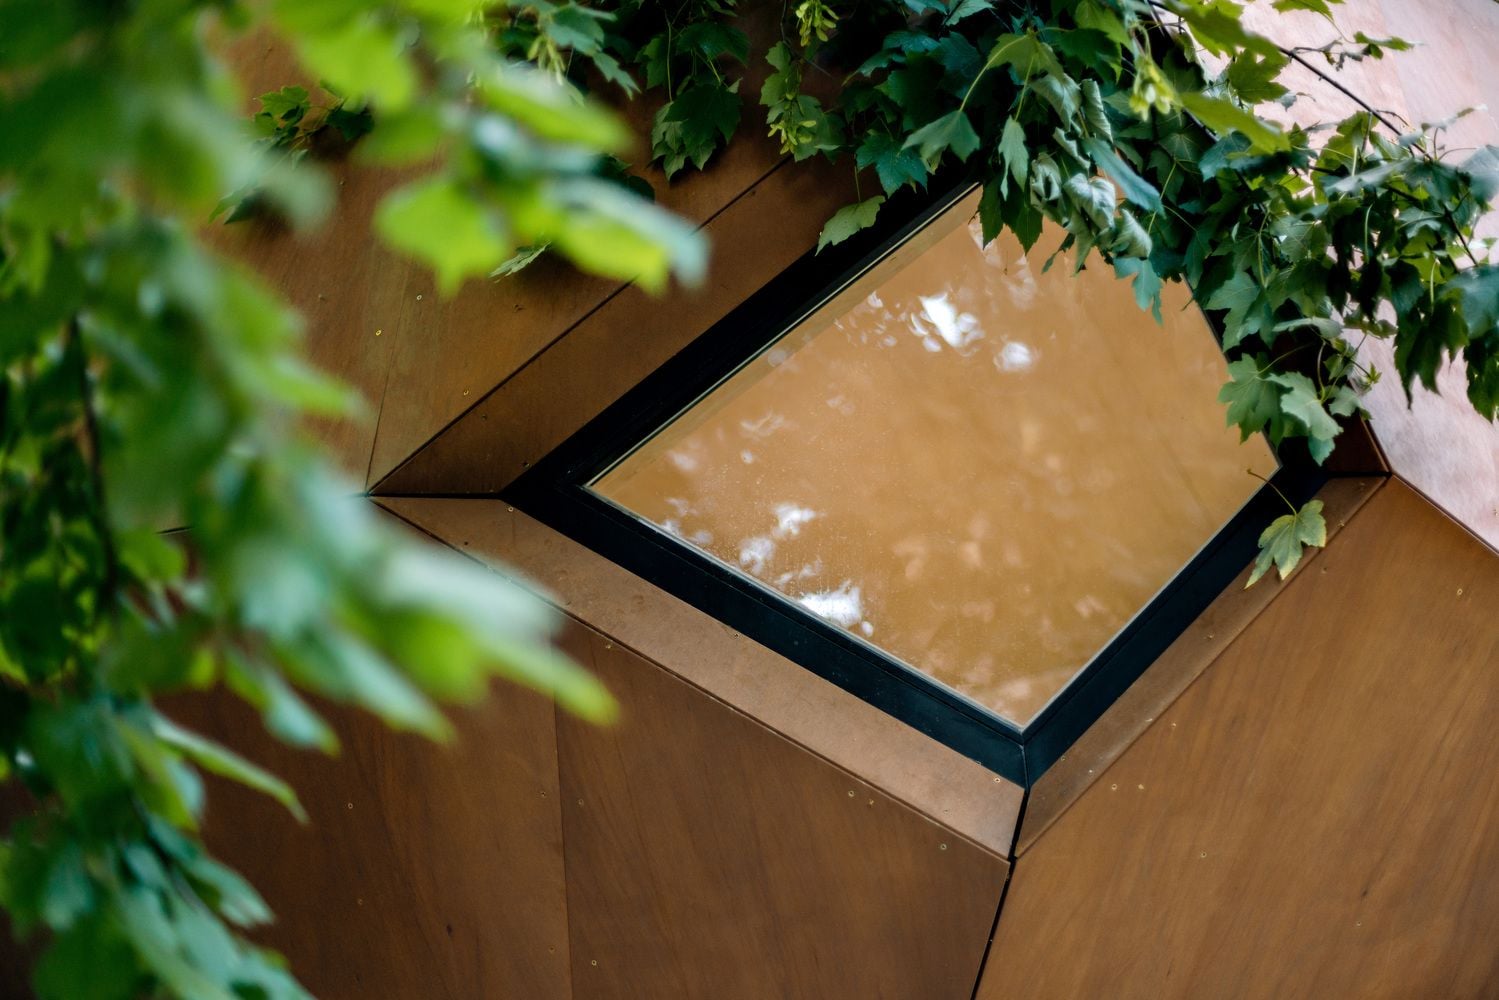 Close-up shot of a small geometric window set into the Workstation Cabin's otherwise all-wooden exterior.